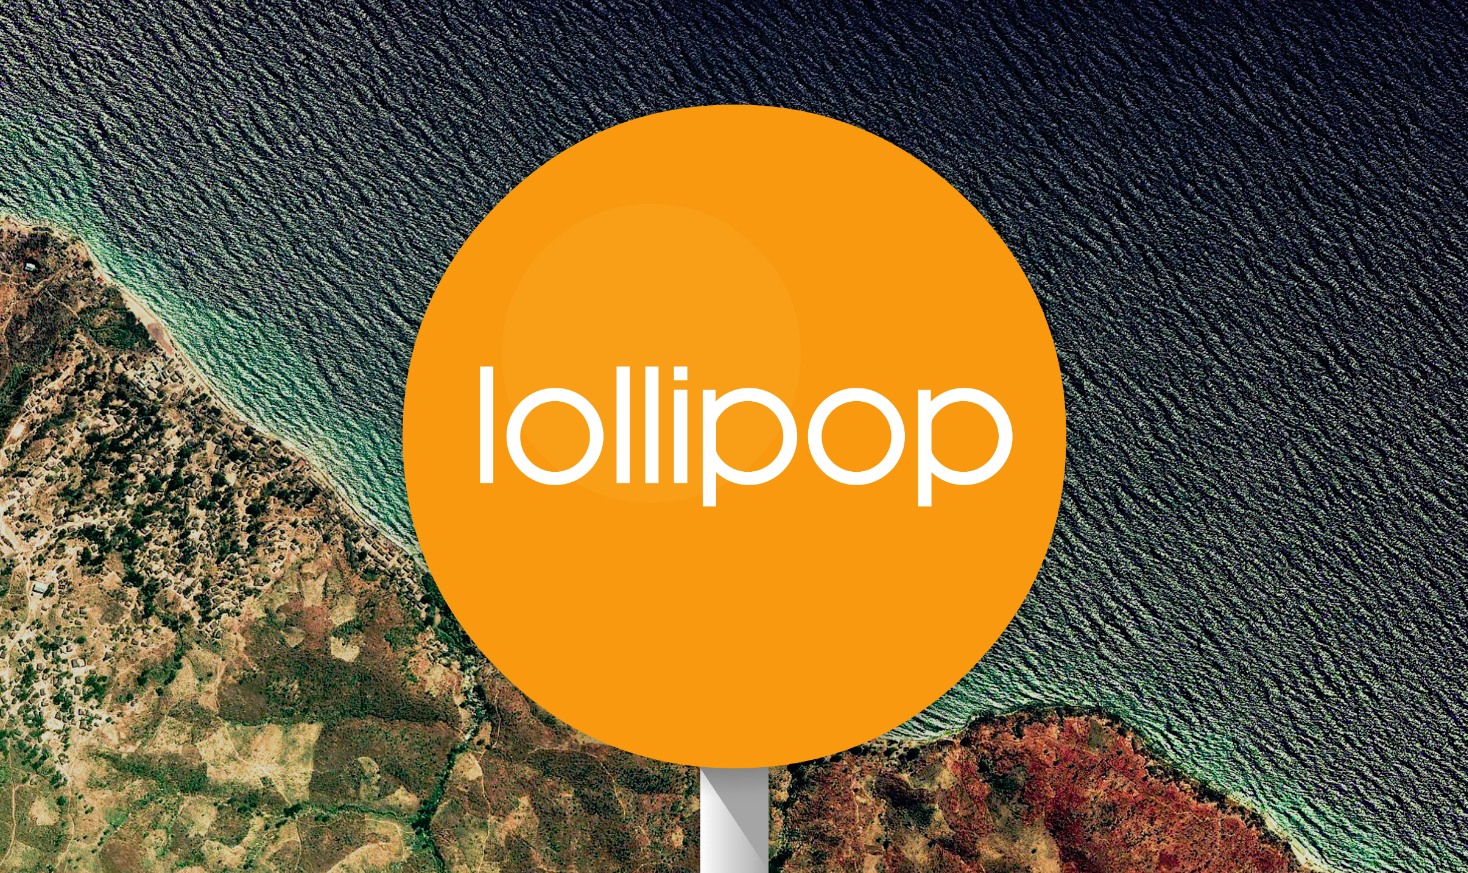 Galaxy Note 2 Lollipop update will apparently be released only in select markets